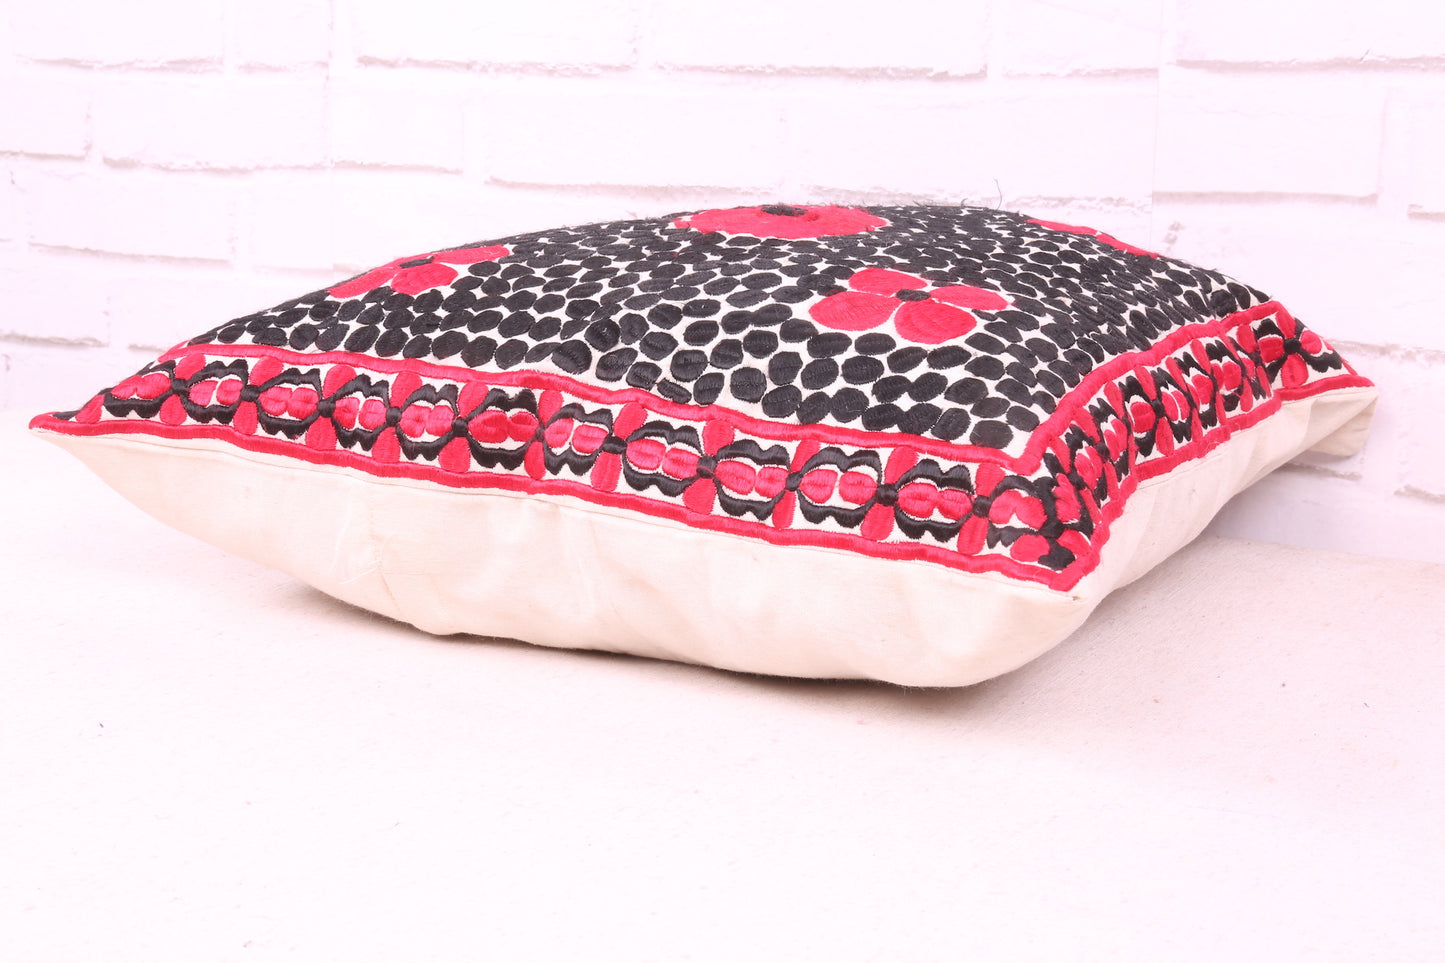 Moroccan Kilim Cushion in Black and Red 17.3 inches X 17.3 inches